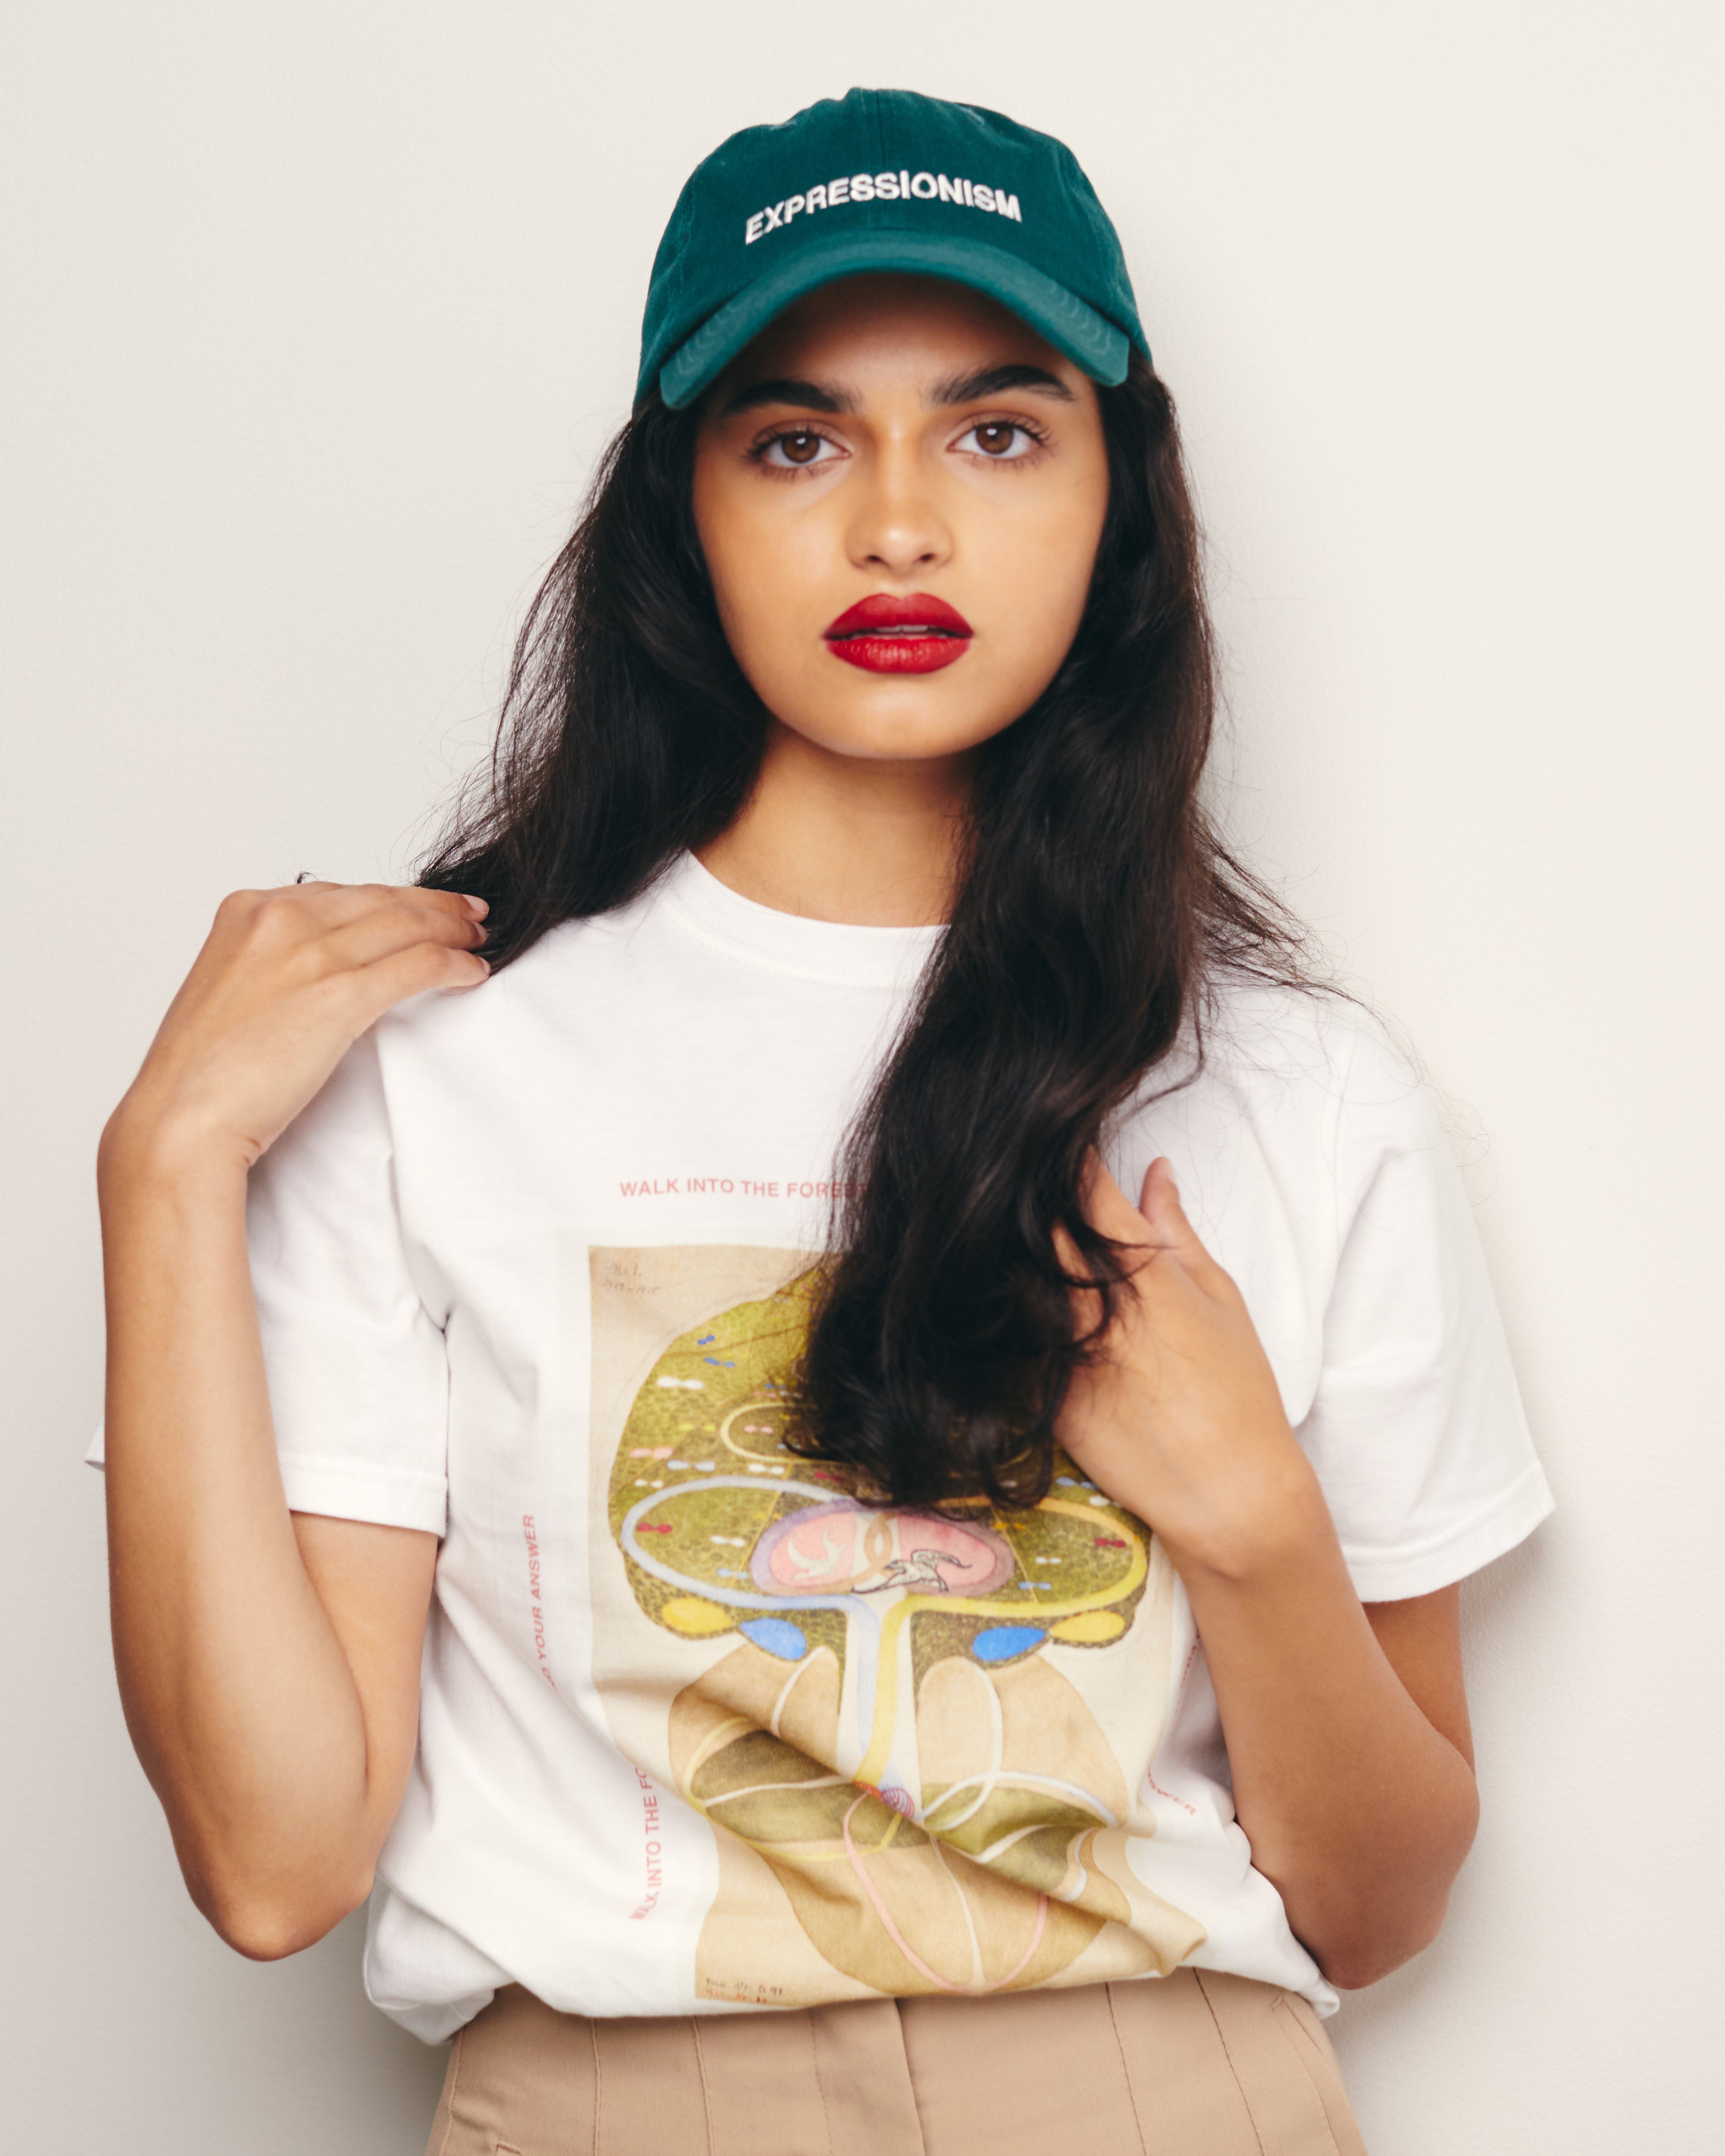 Mira Bhat Wears 100% Cotton Green Baseball Cap / Dad Hat with Expressionism Art Movement Text Embroidery on Front with 100% Organic Cotton White Tshirt / Tee / T-shirt with Hilma af Klint Tree of Knowledge Graphic Print.